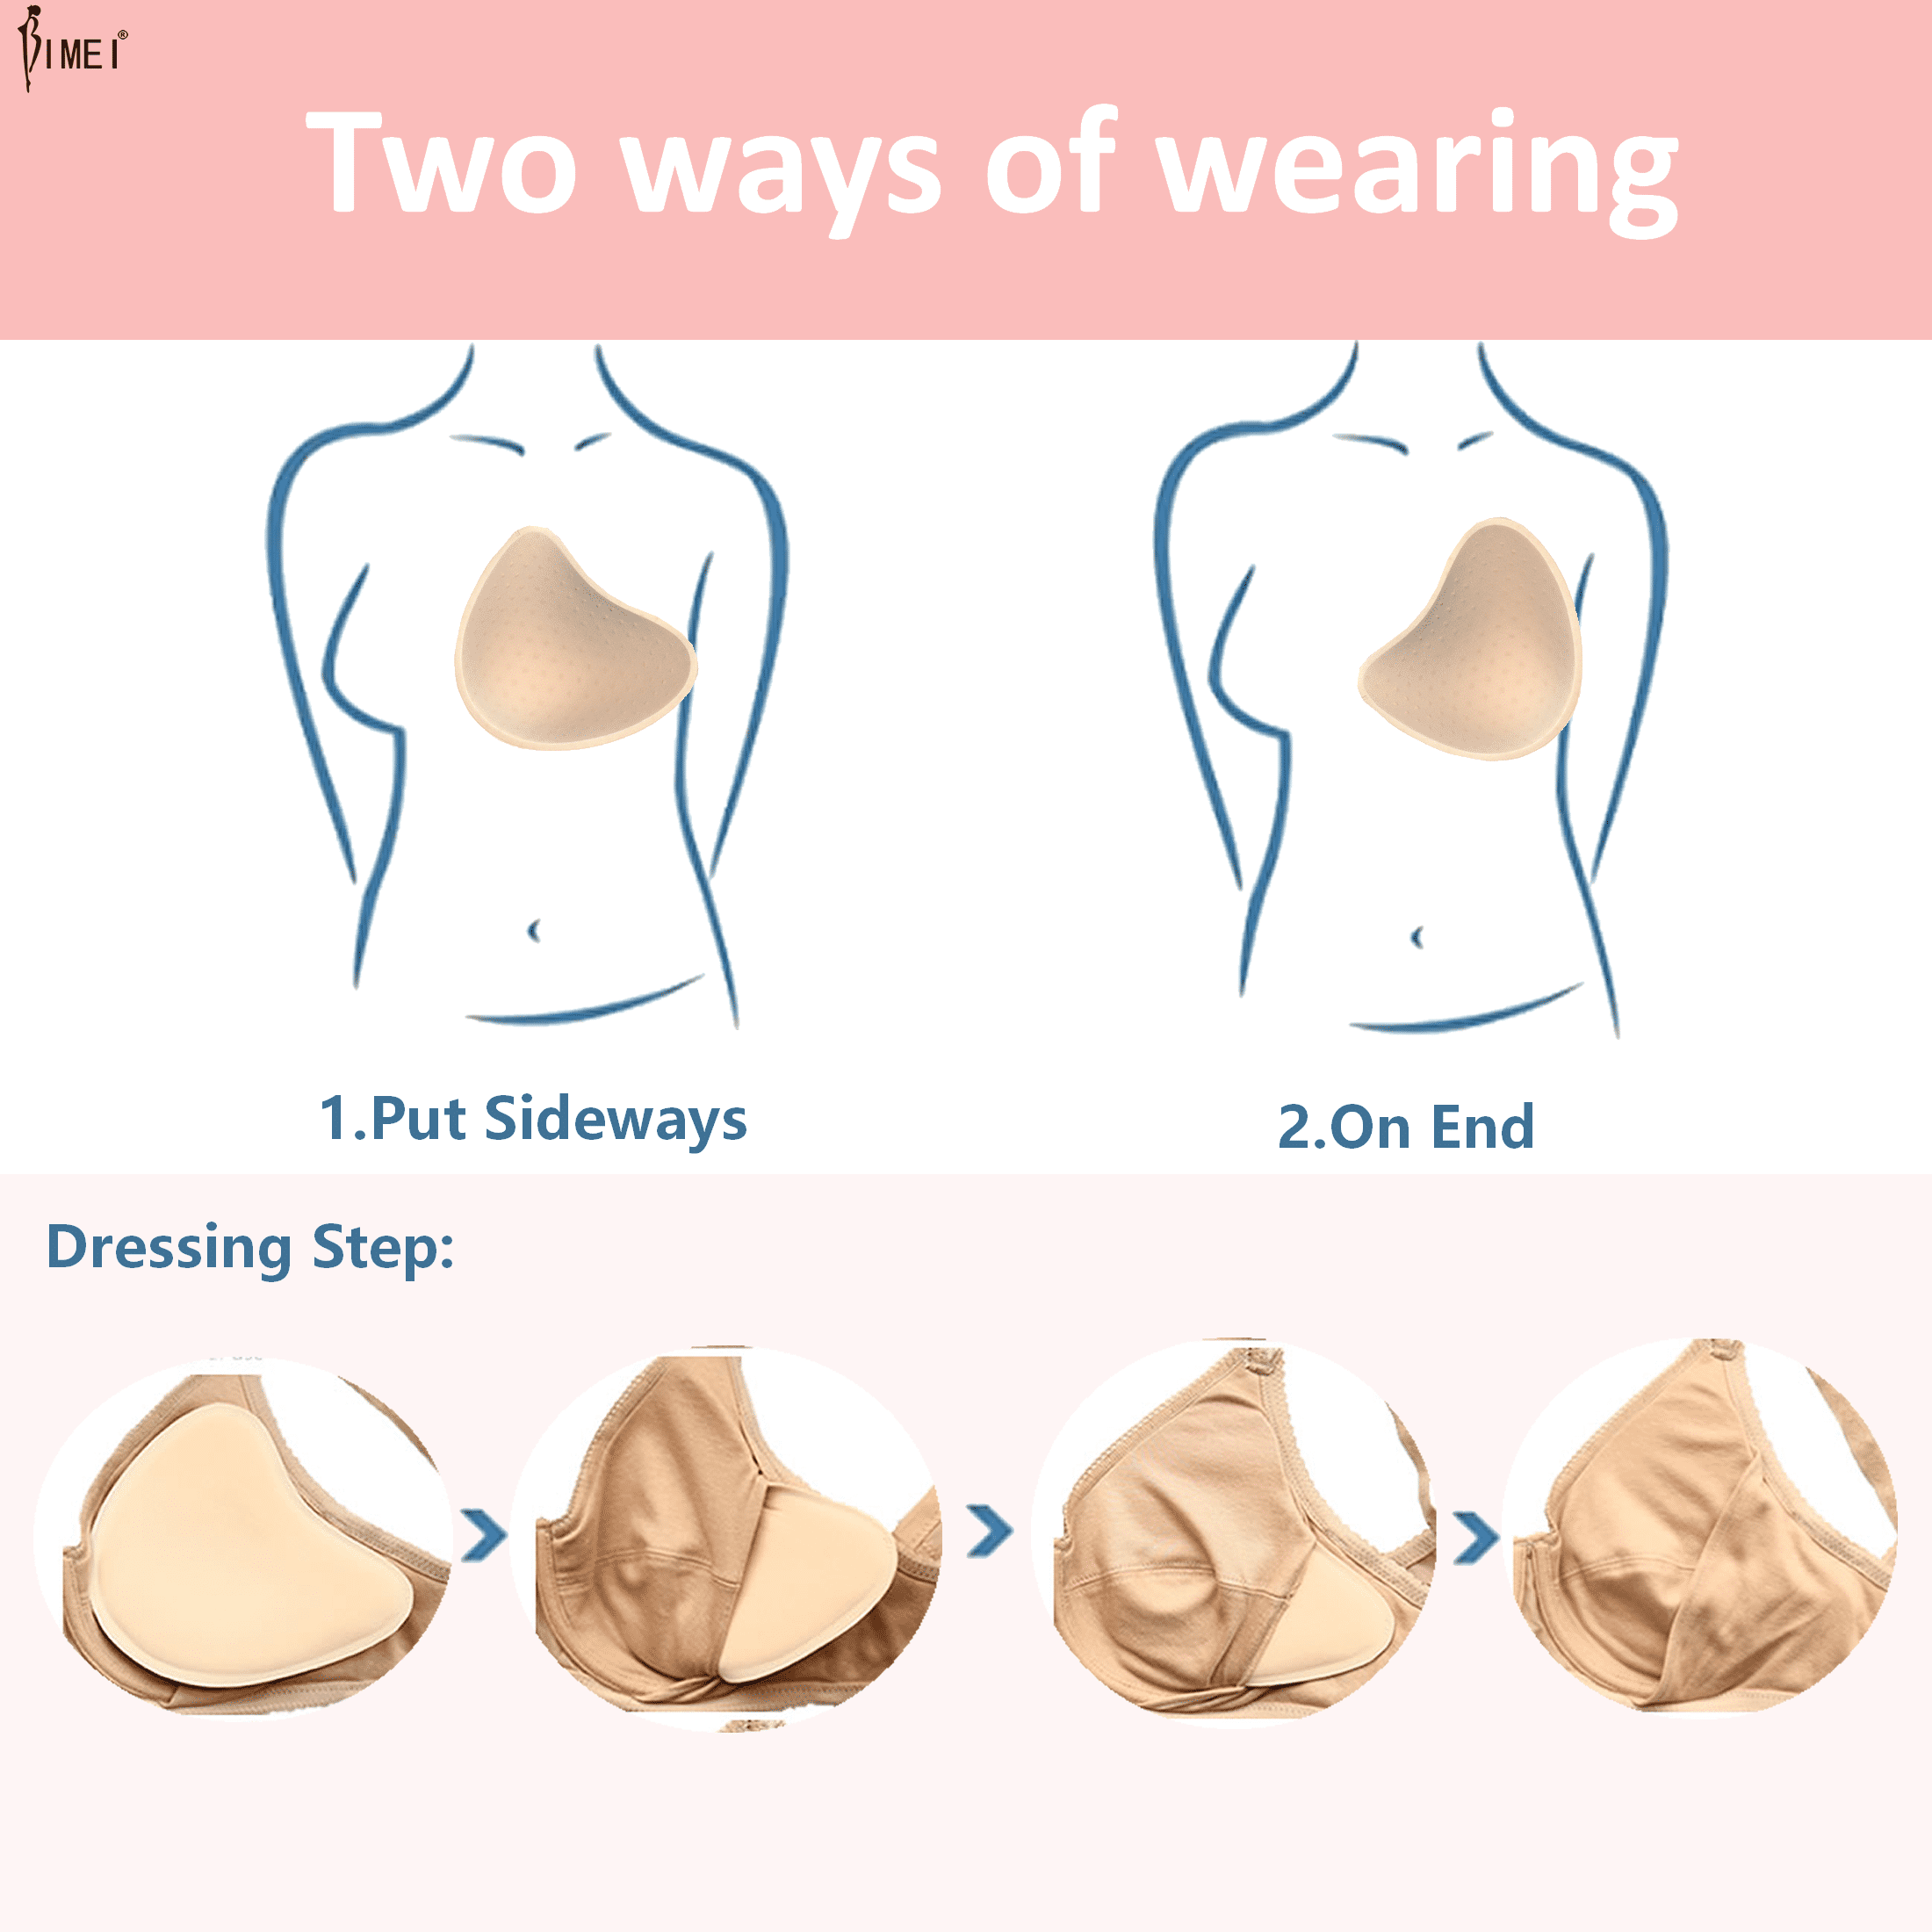 Breast Forms Fitting Process: Find the Right Breast Form For You